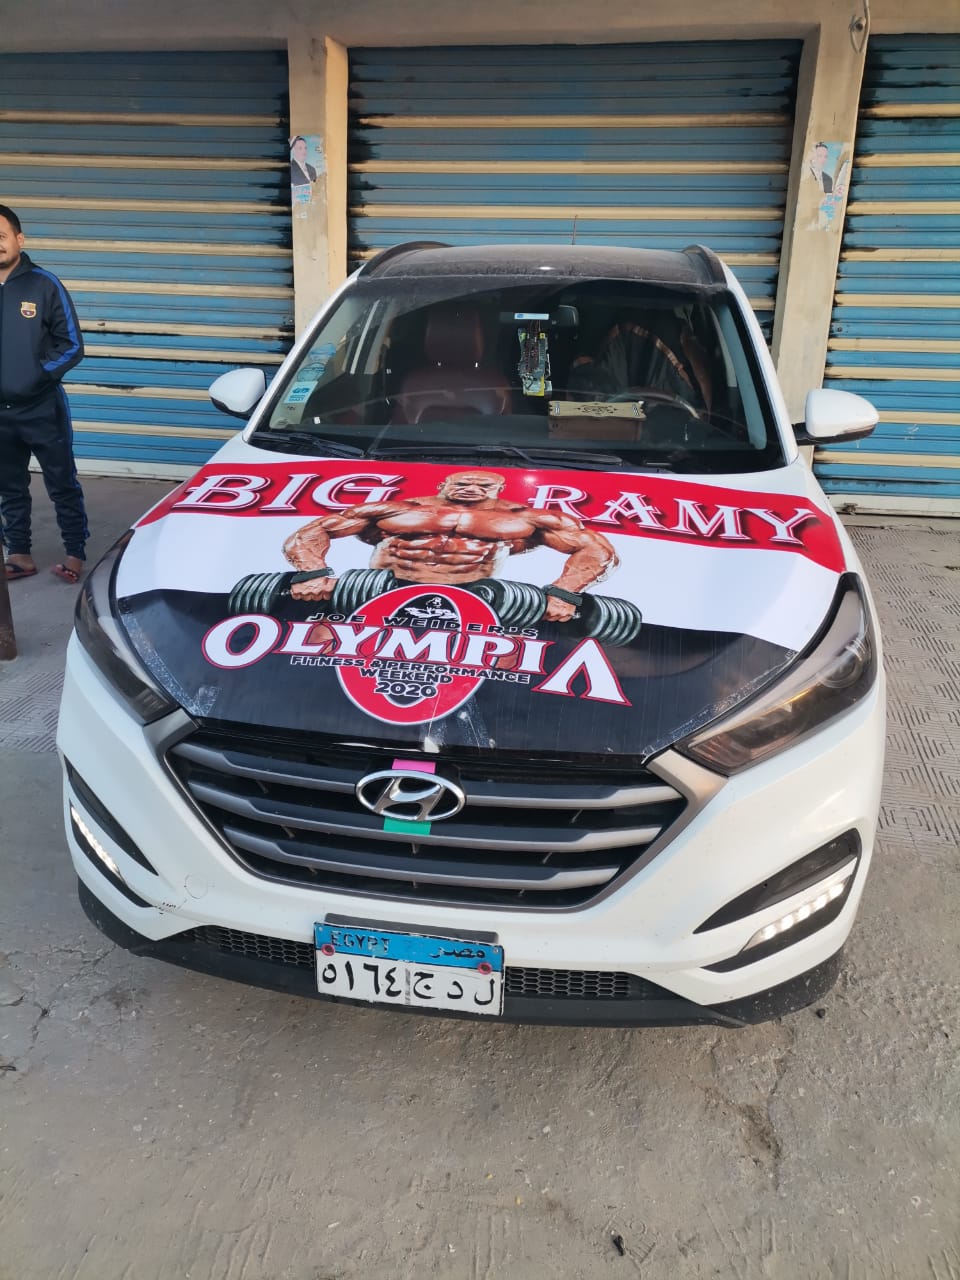 A march in cars and a guy, with a T-shirt with a photo of Rami Al-Subaie, to greet him (12)